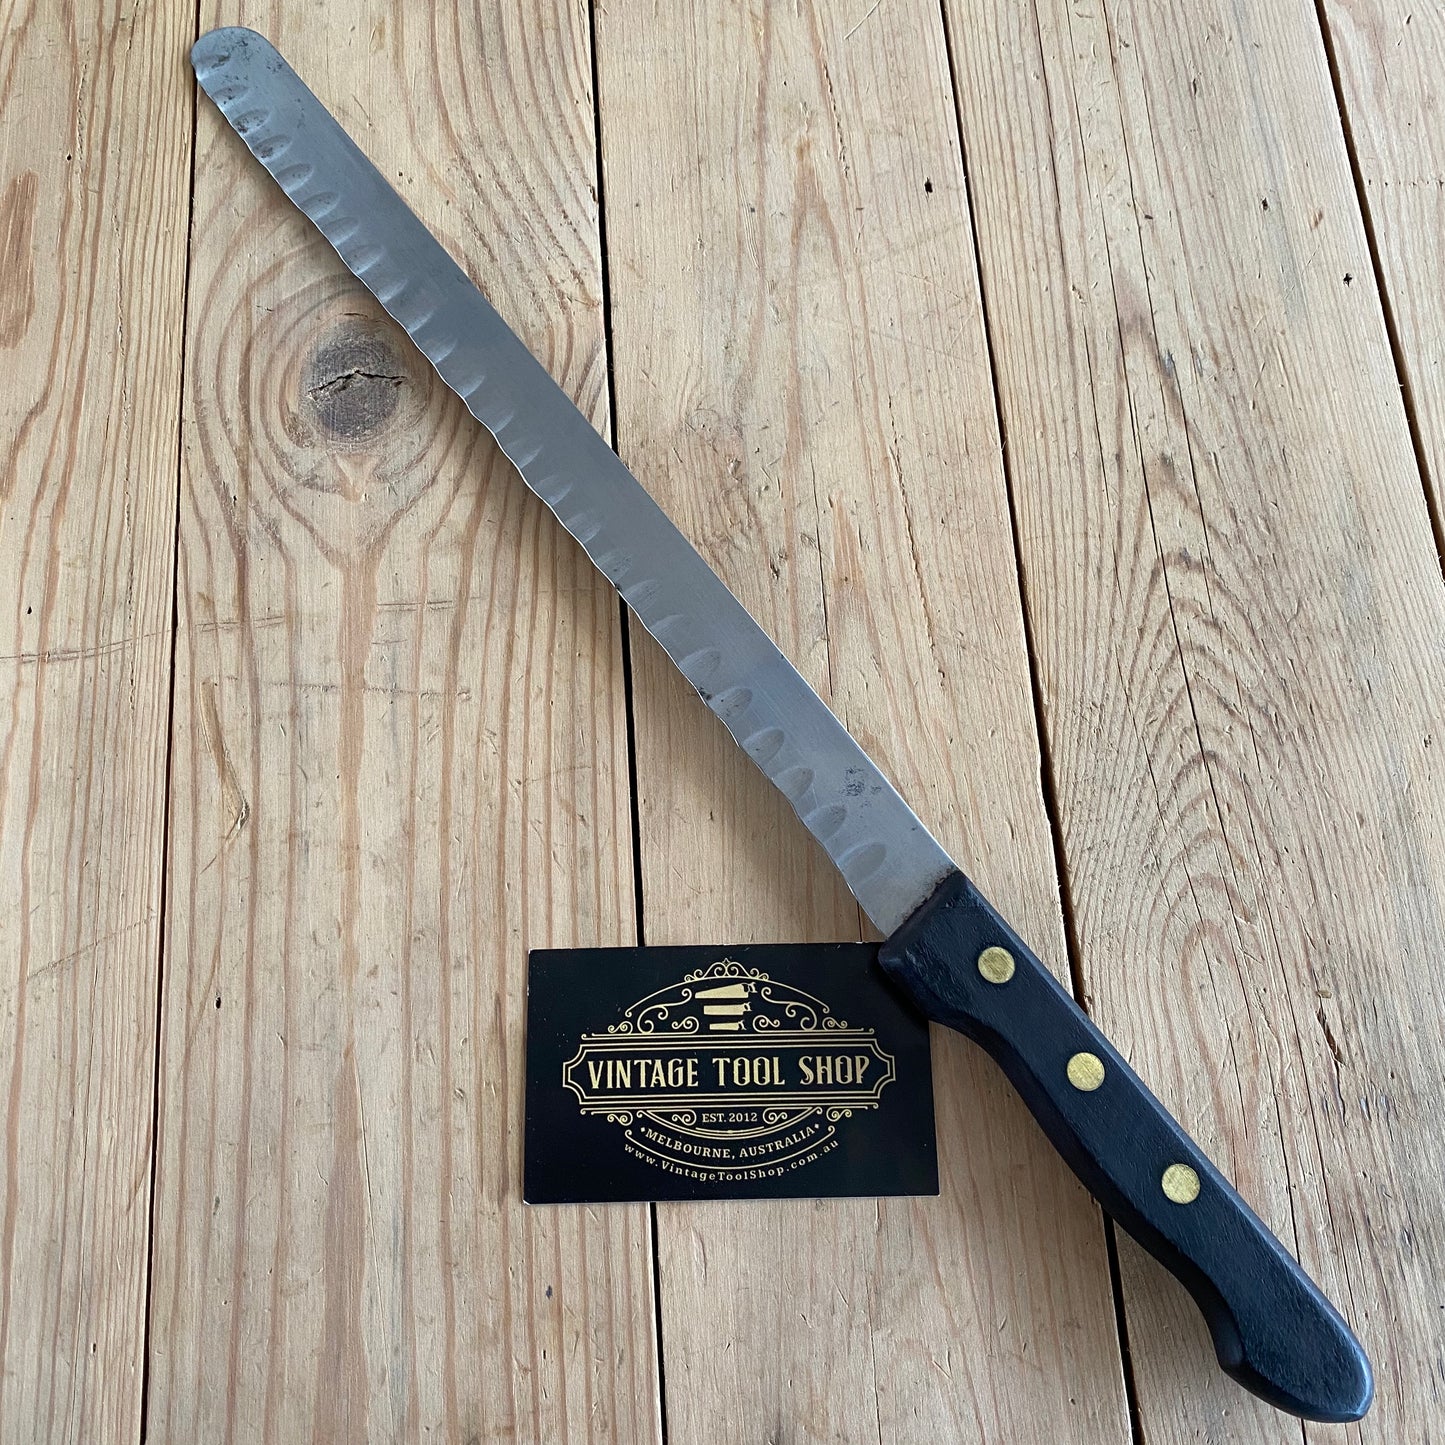 SOLD Vintage long stainless steel GRANTON HAM KNIFE by William Grant T6765